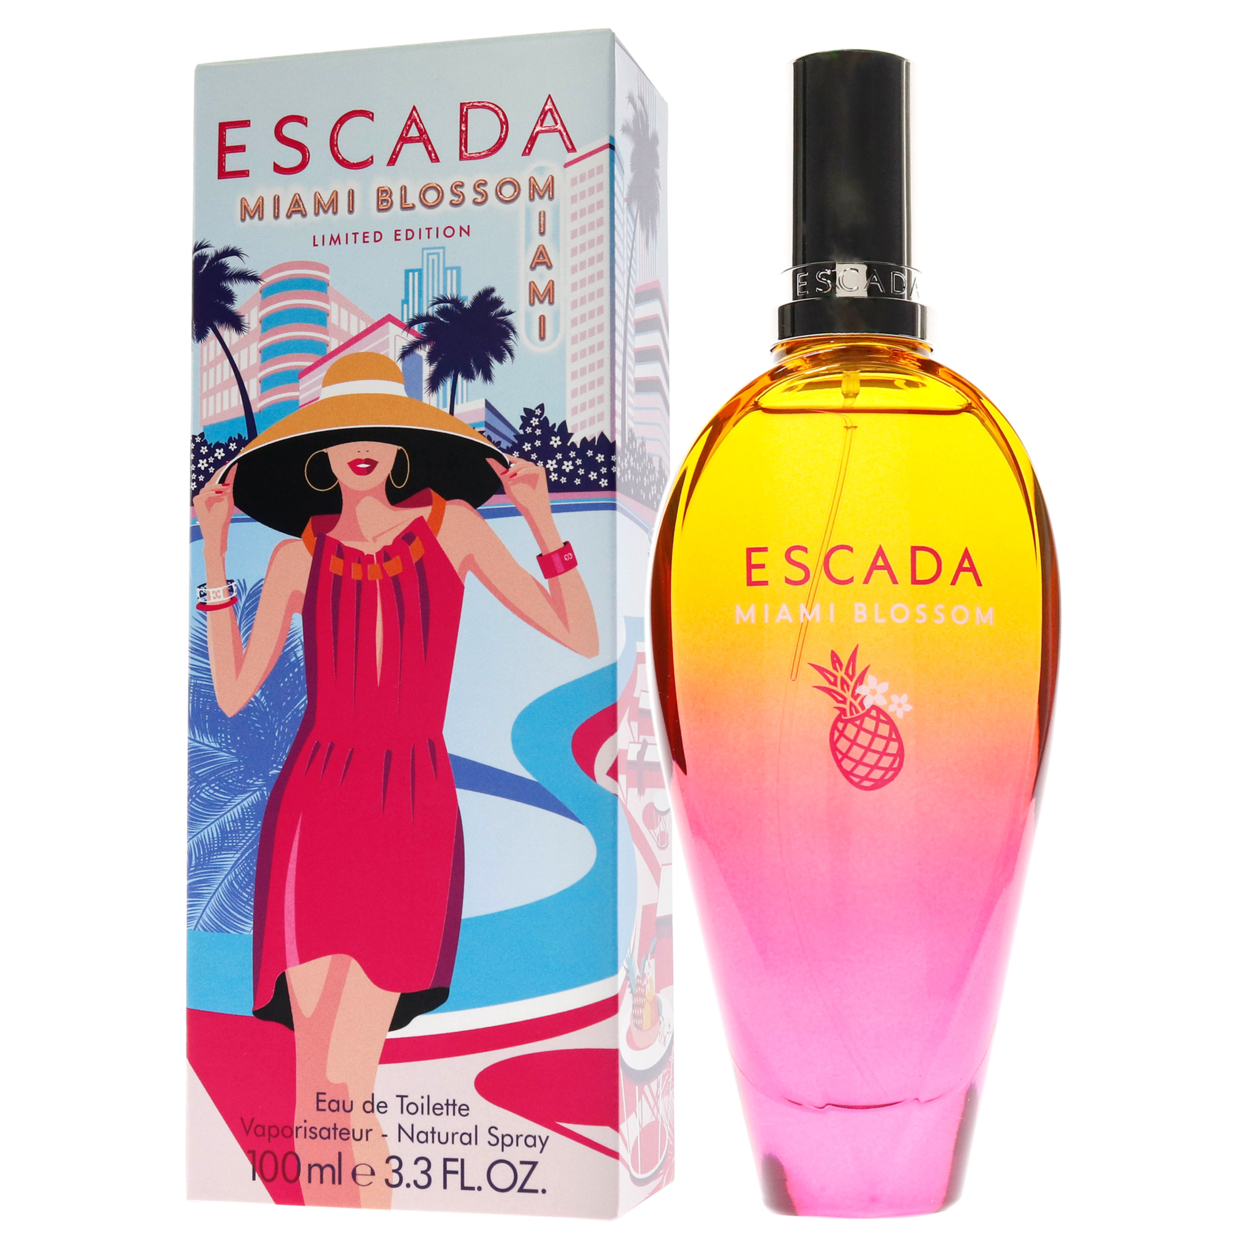 Miami Blossom by Escada for Women - 3.3 oz EDT Spray (Limited Edition) - image 4 of 6